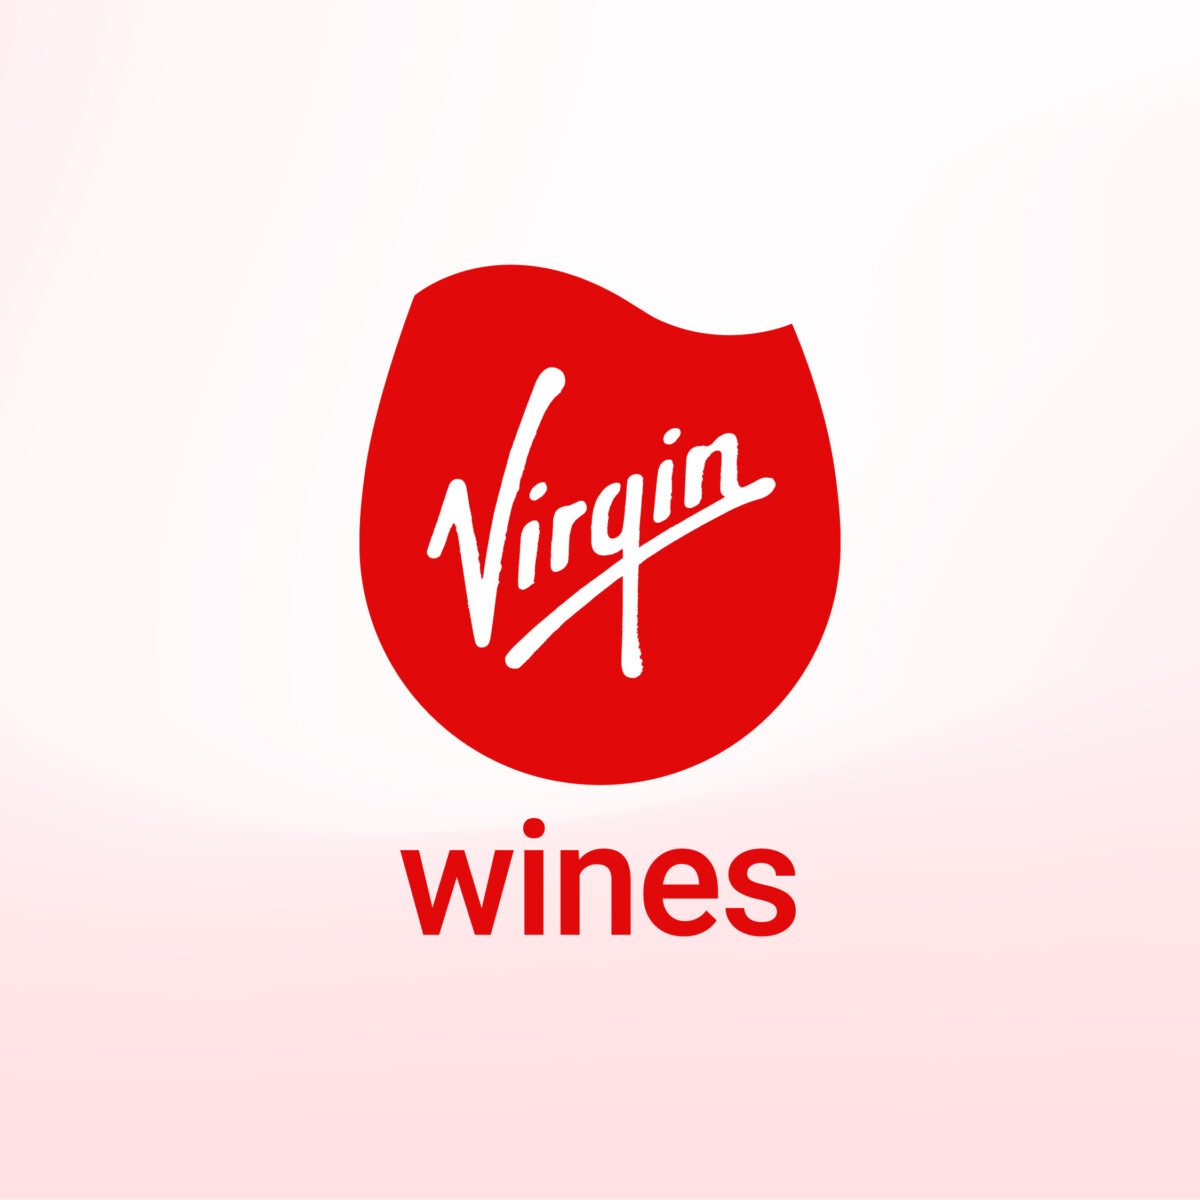 Image shows the new Virgin wines logo which appears like a wine swirl. 